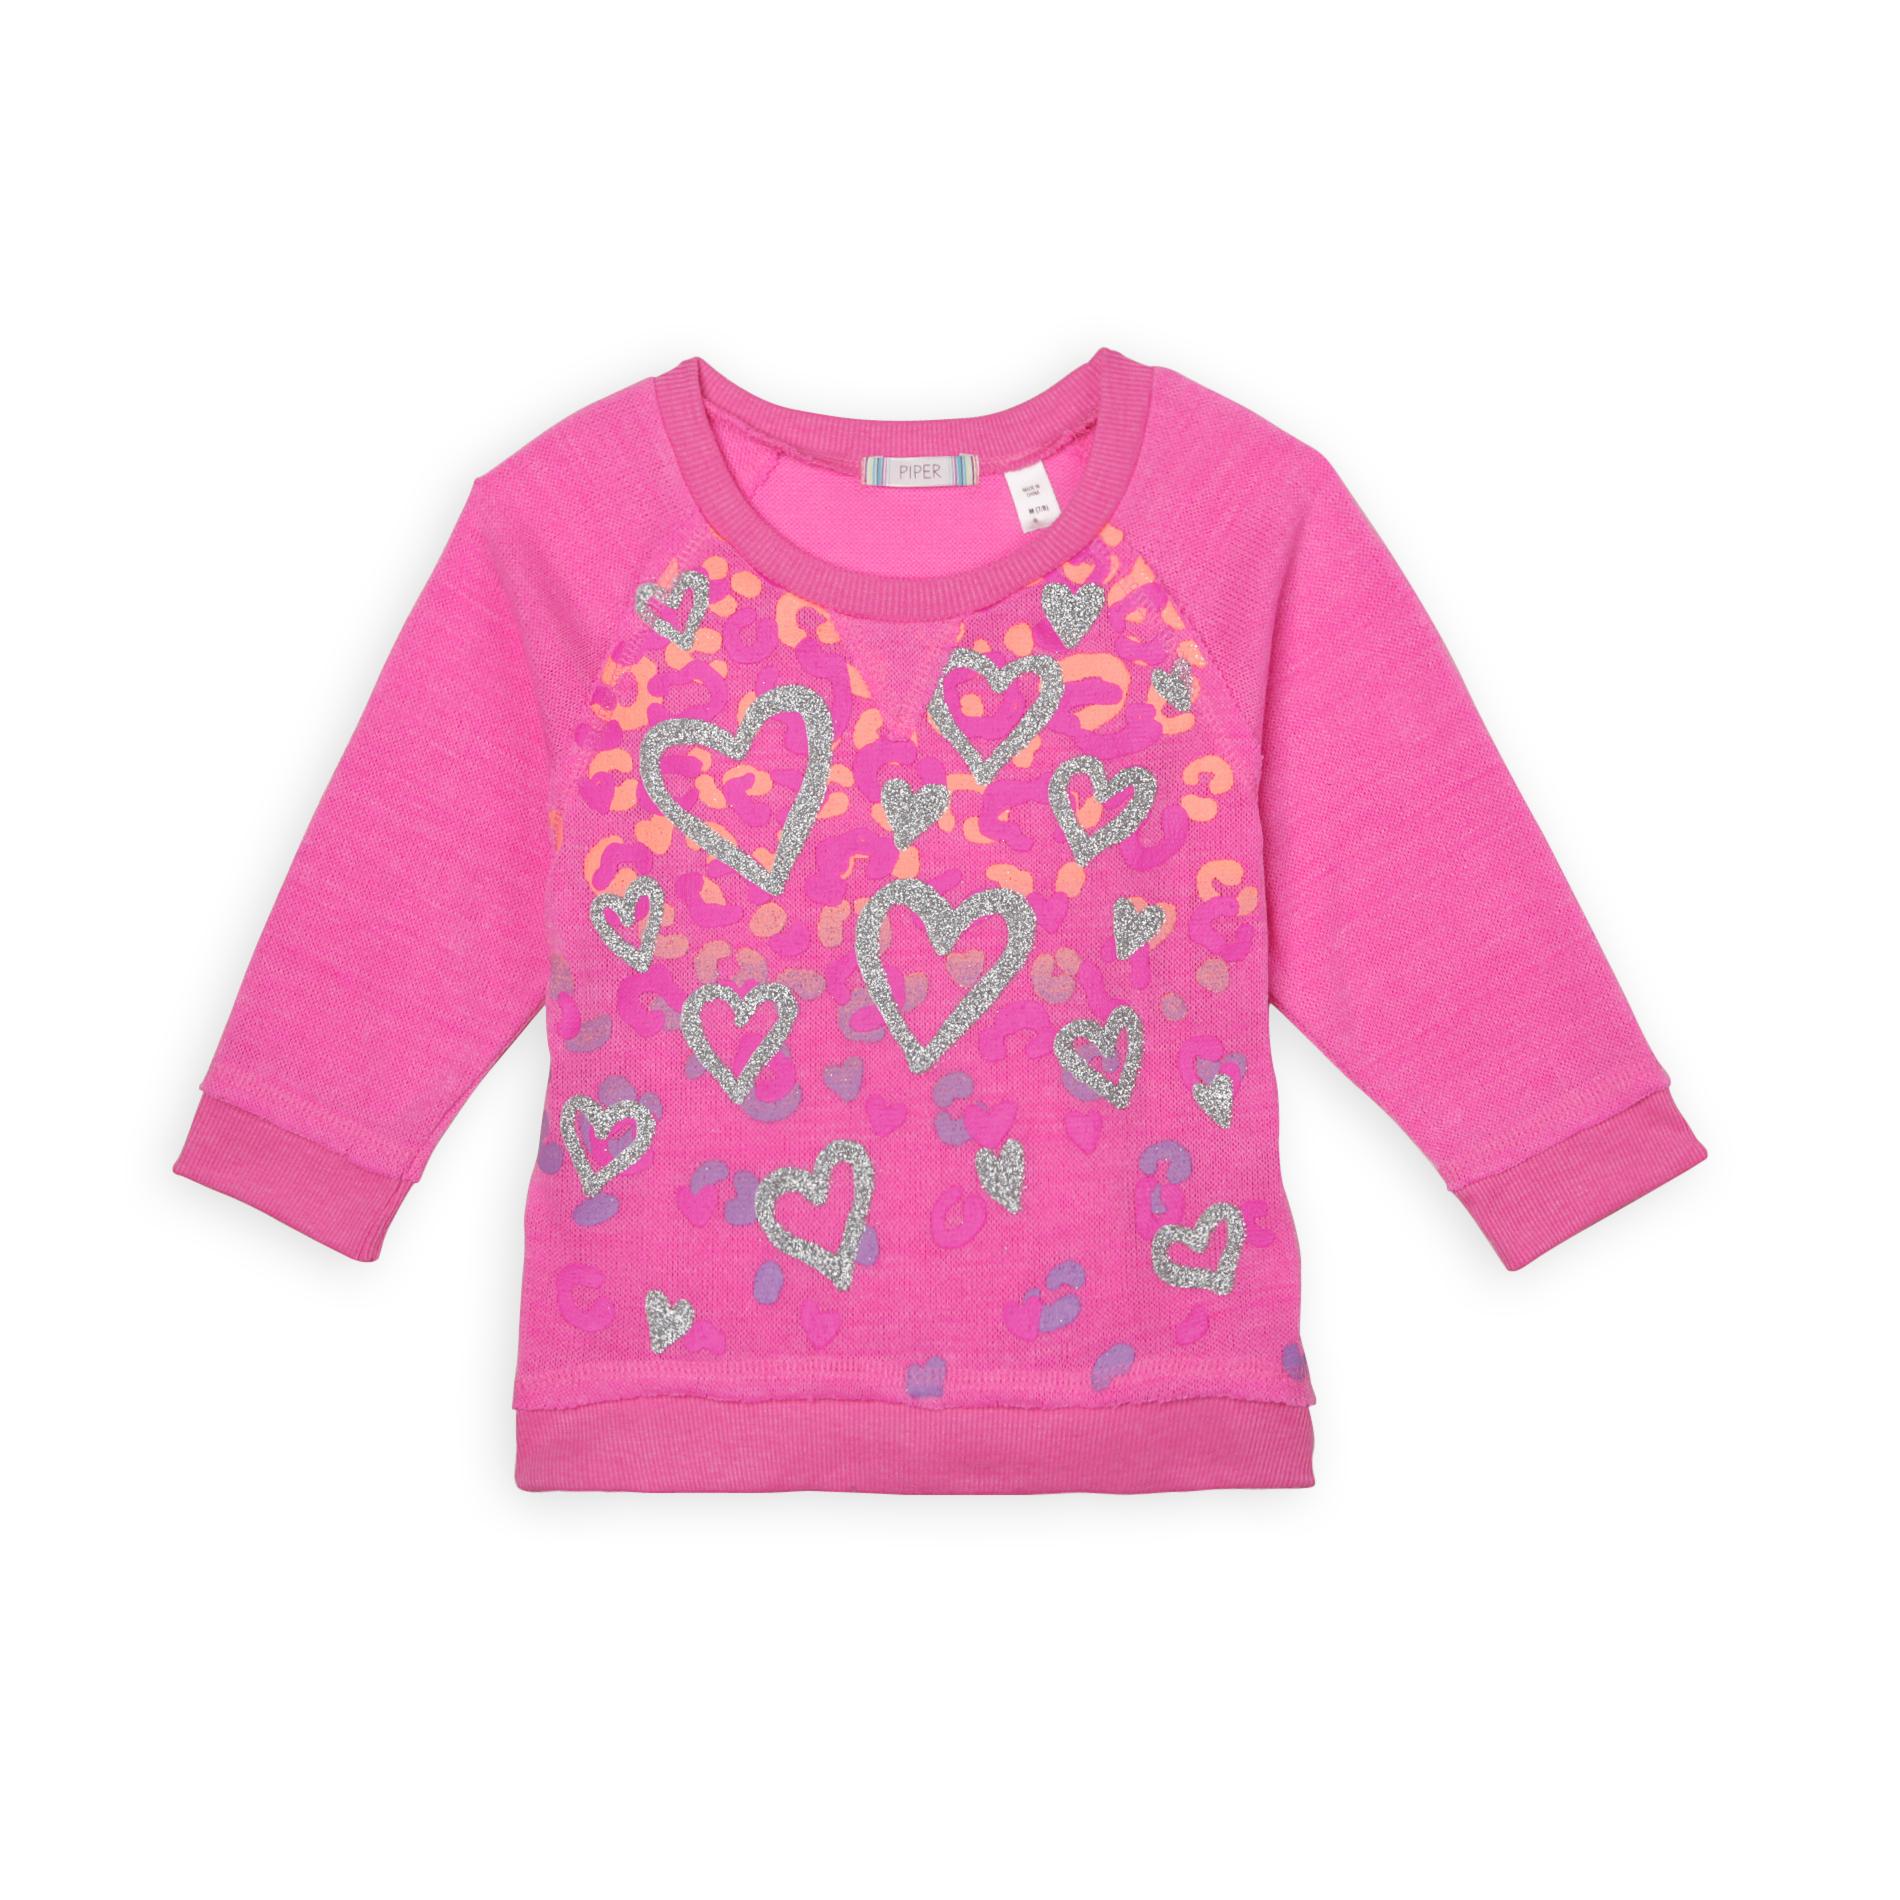 Piper Girl's Graphic Knit Top - Leopard-Print & Hearts